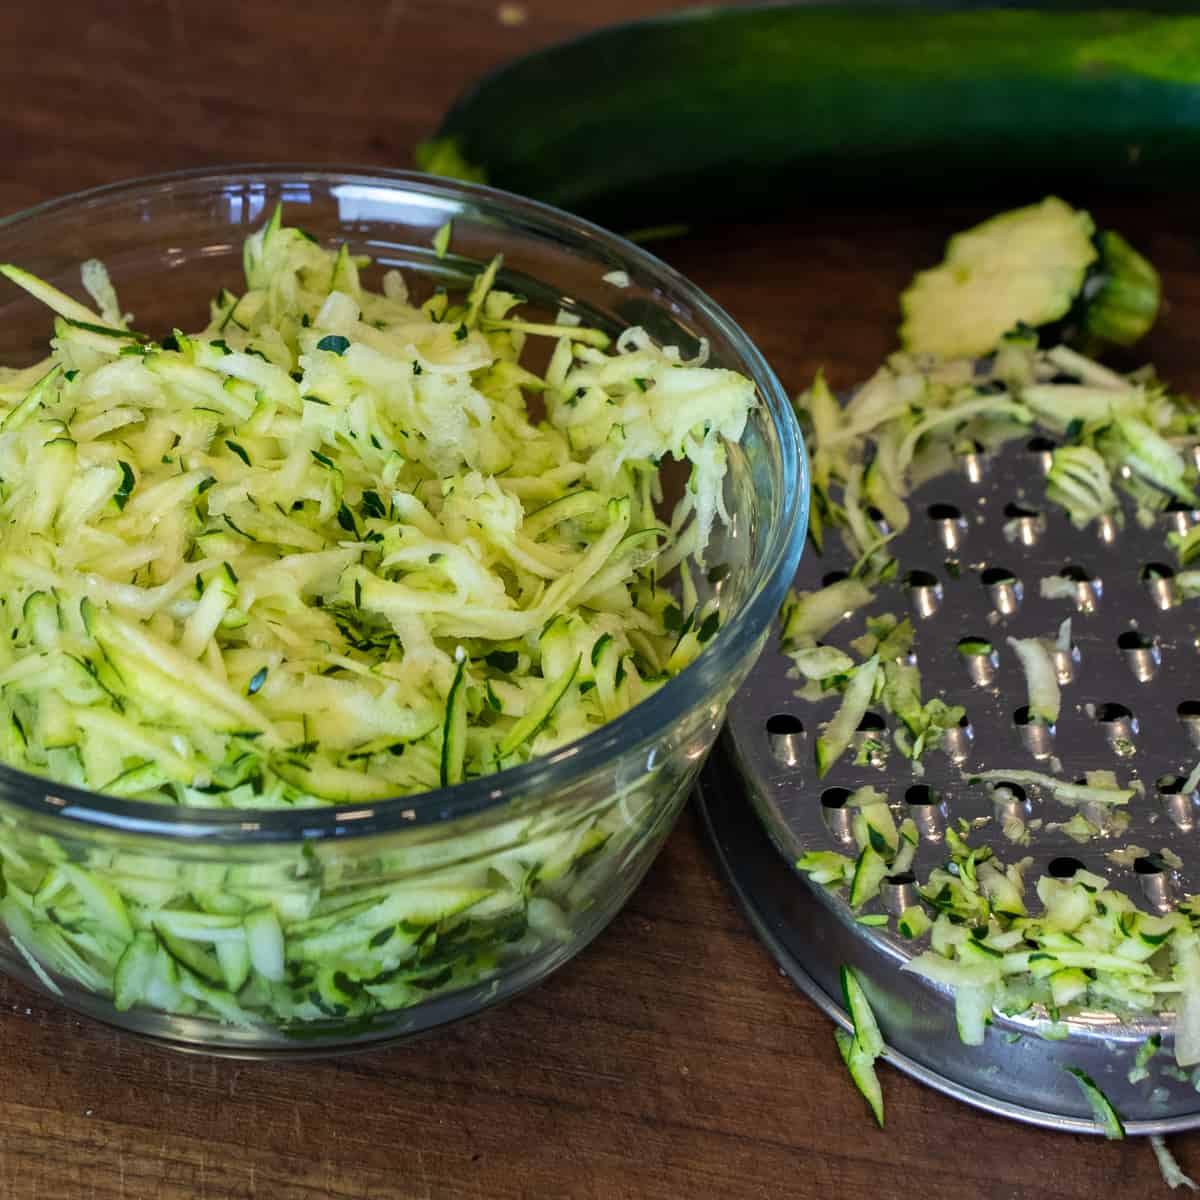 A glass bowl filled with grated zucchini.